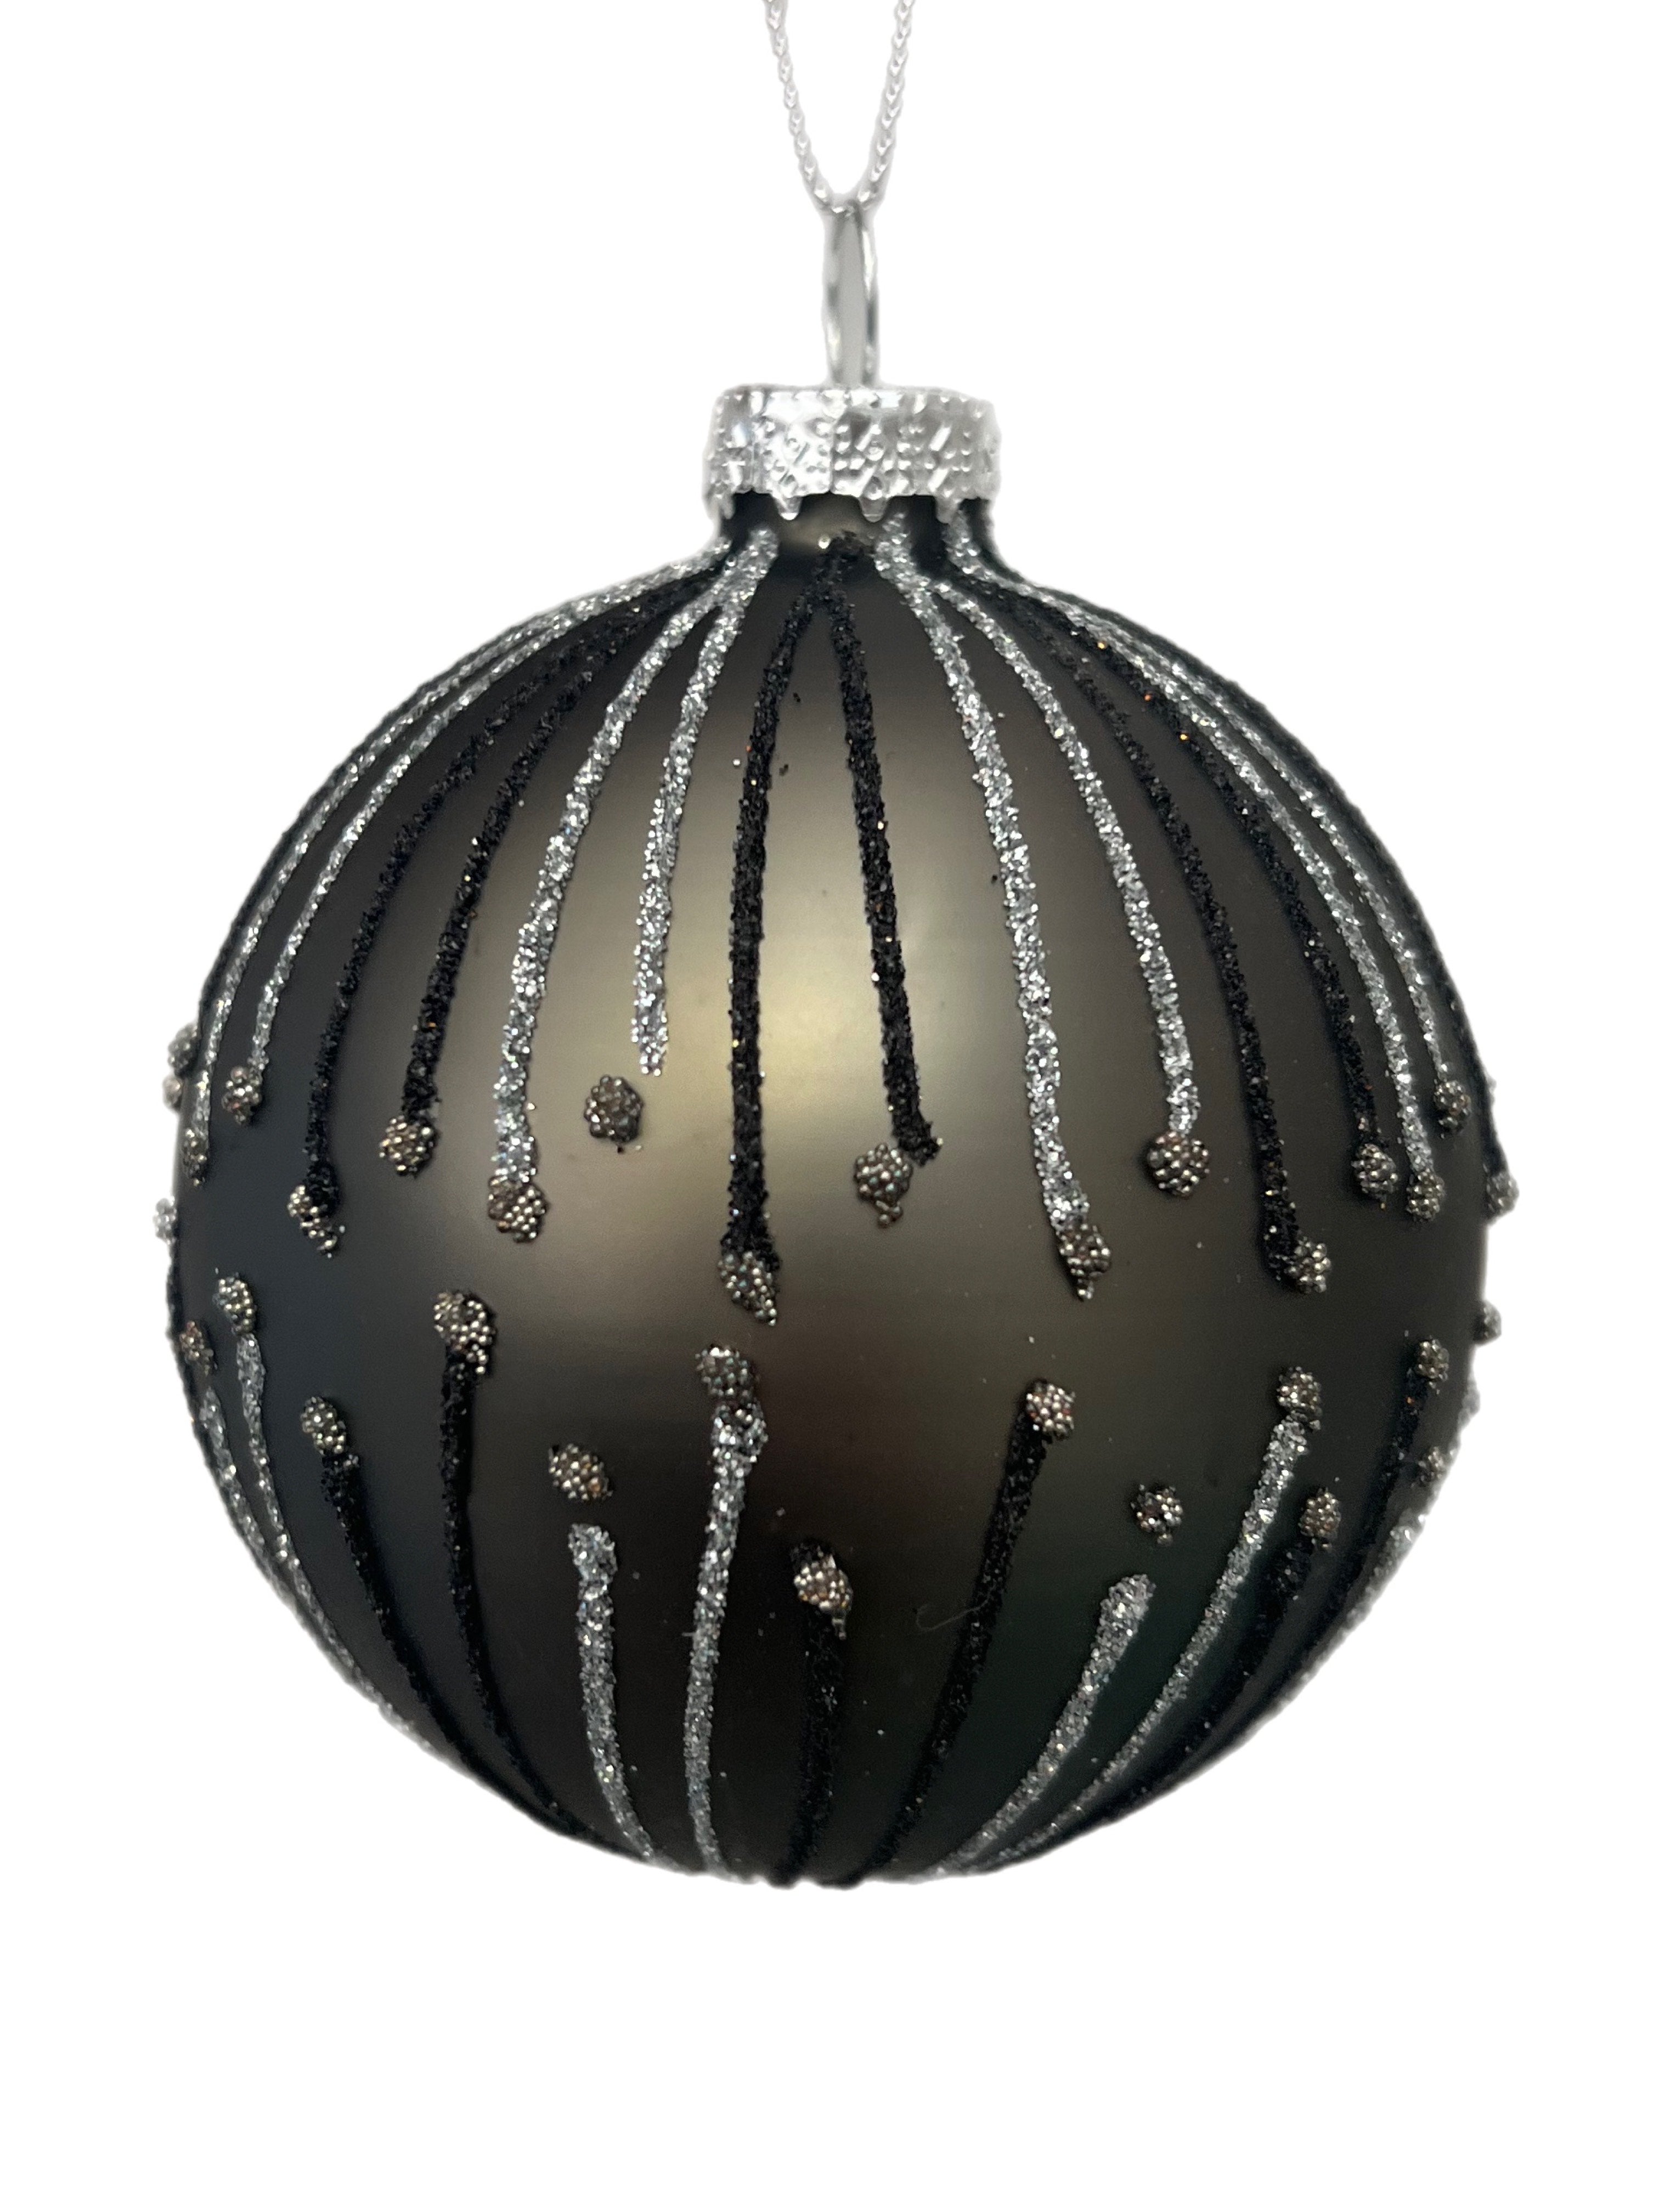 Dark Grey Glass Festive Christmas Bauble with Glitter Details by Heaven Sends